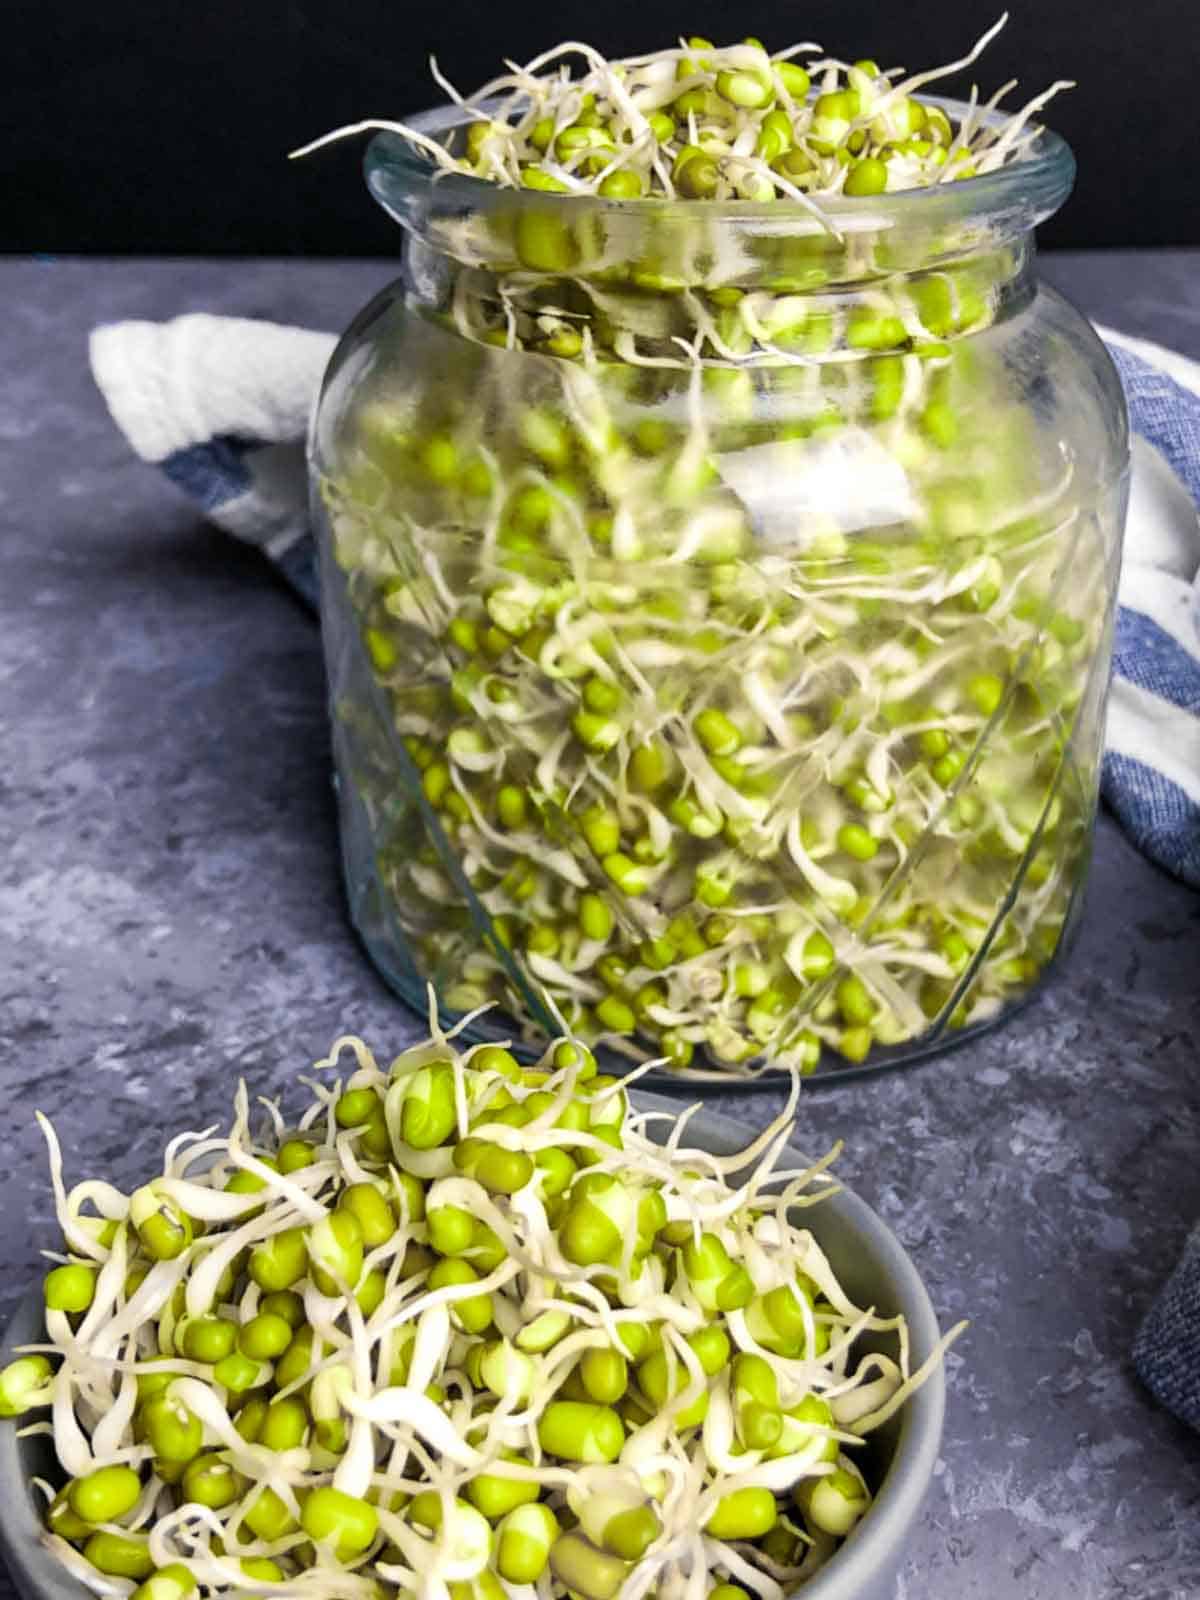 Sprouted mung beans stored in a glass jar.